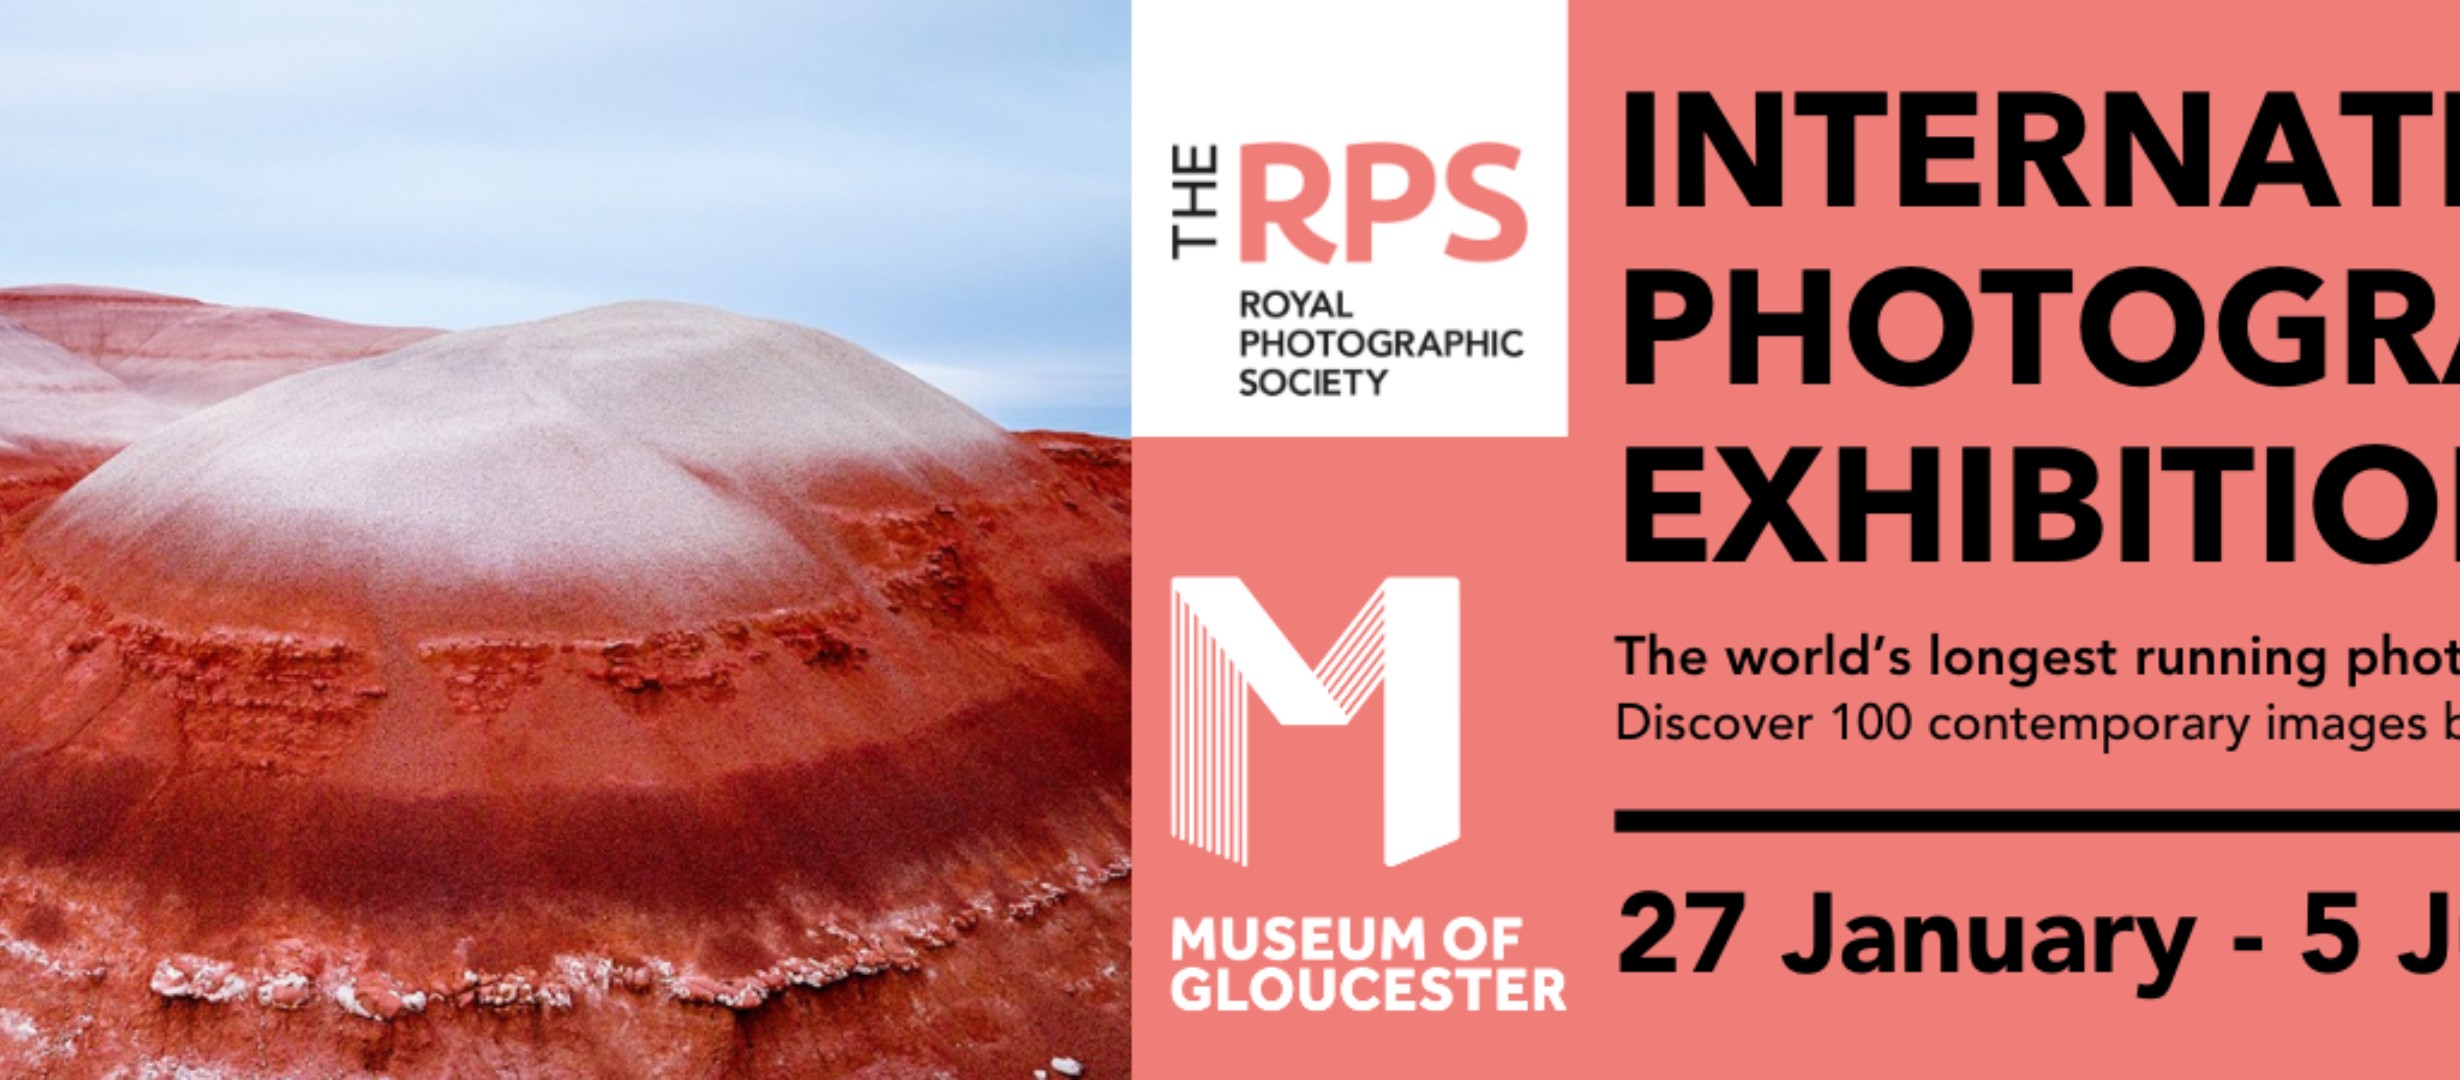 The RPS International Photography Exhibition (IPE) 162